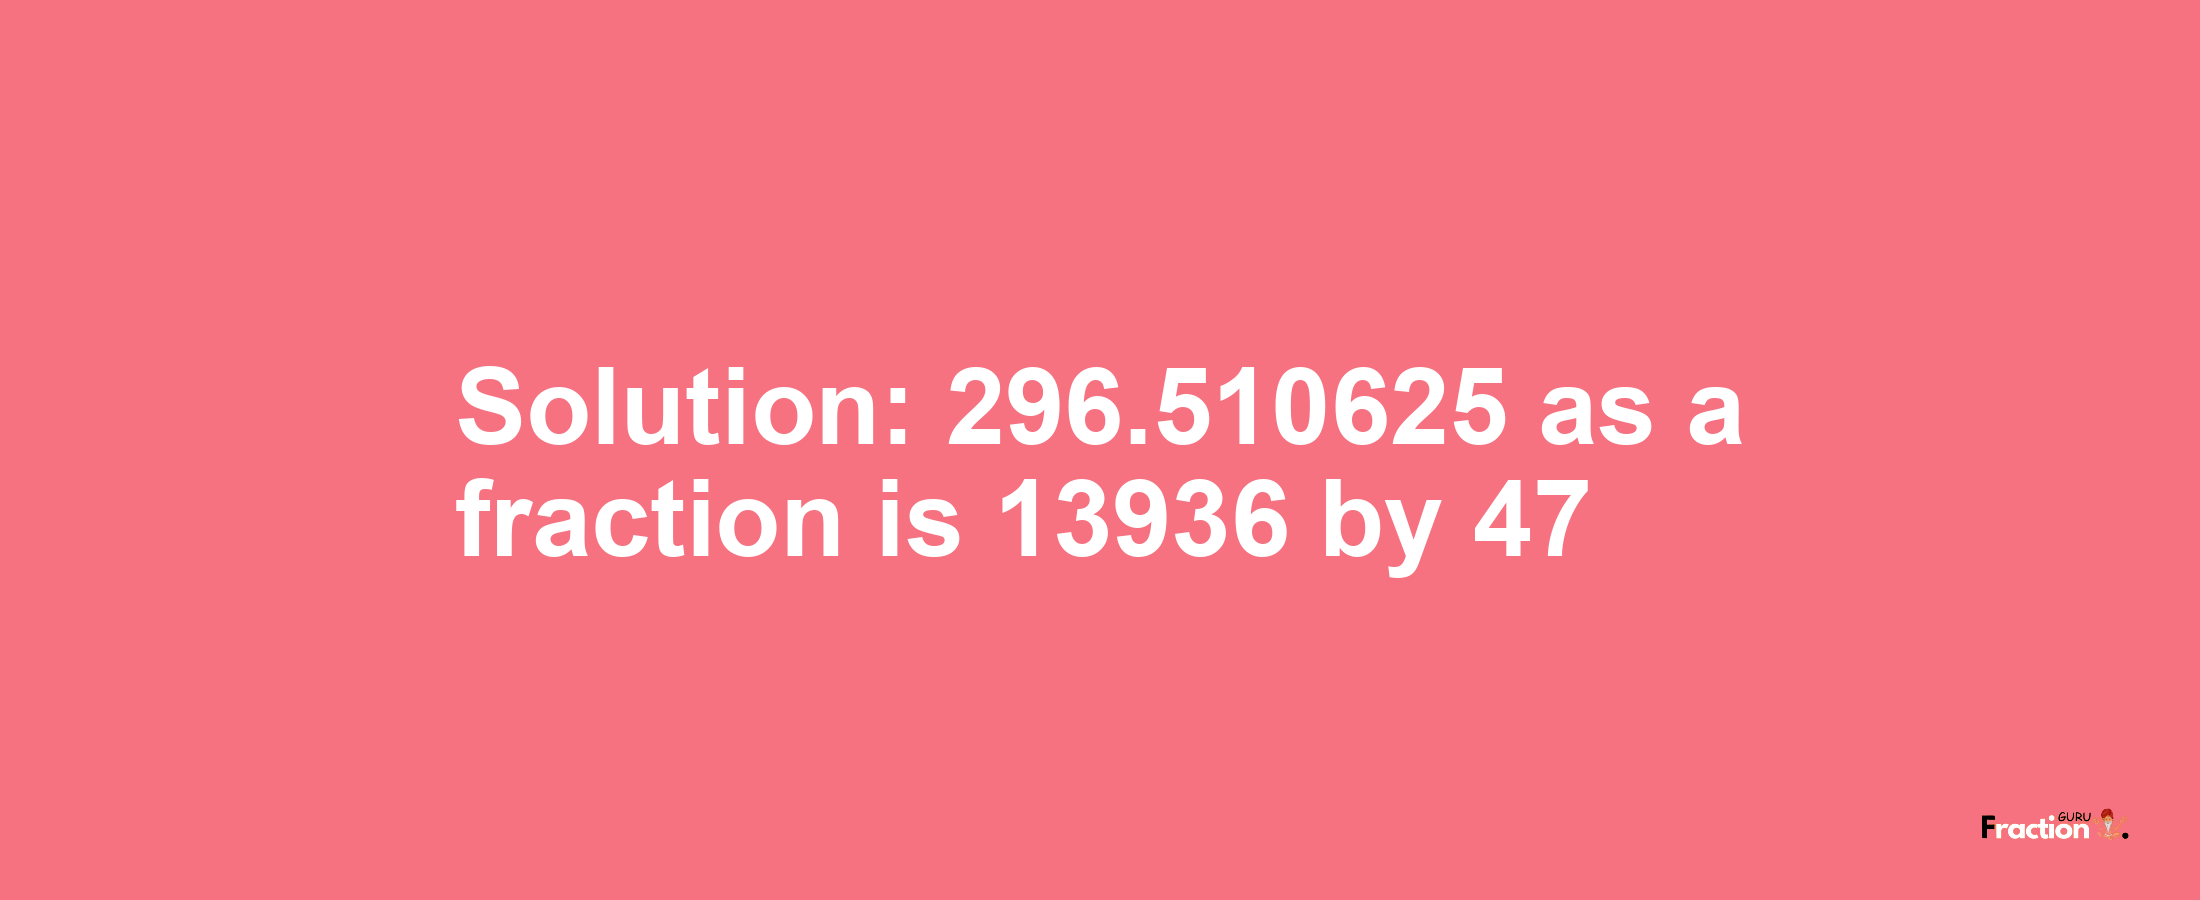 Solution:296.510625 as a fraction is 13936/47